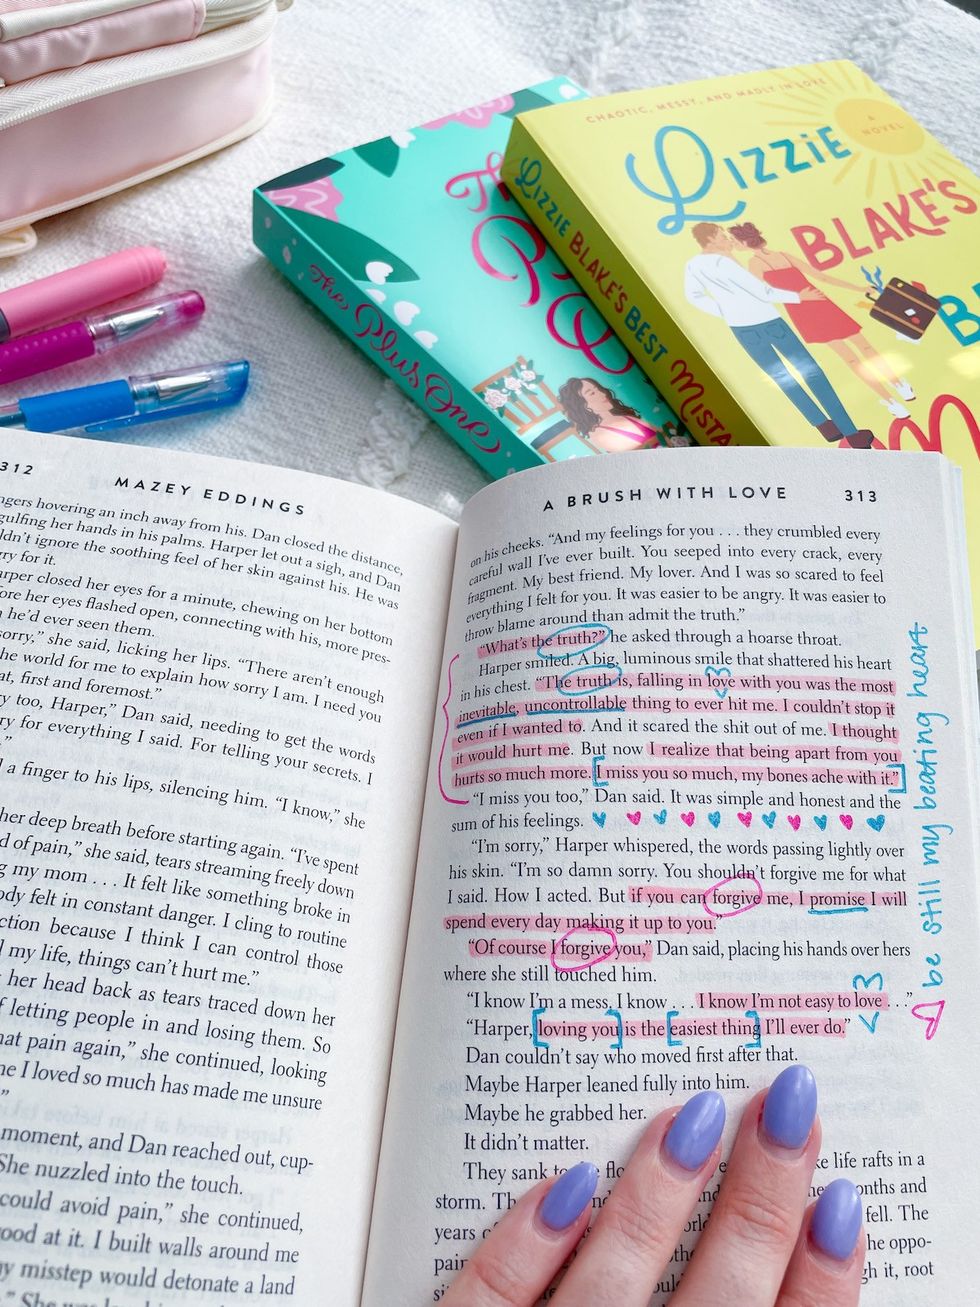 How To Annotate Books - Supplies and Easy Ideas! 